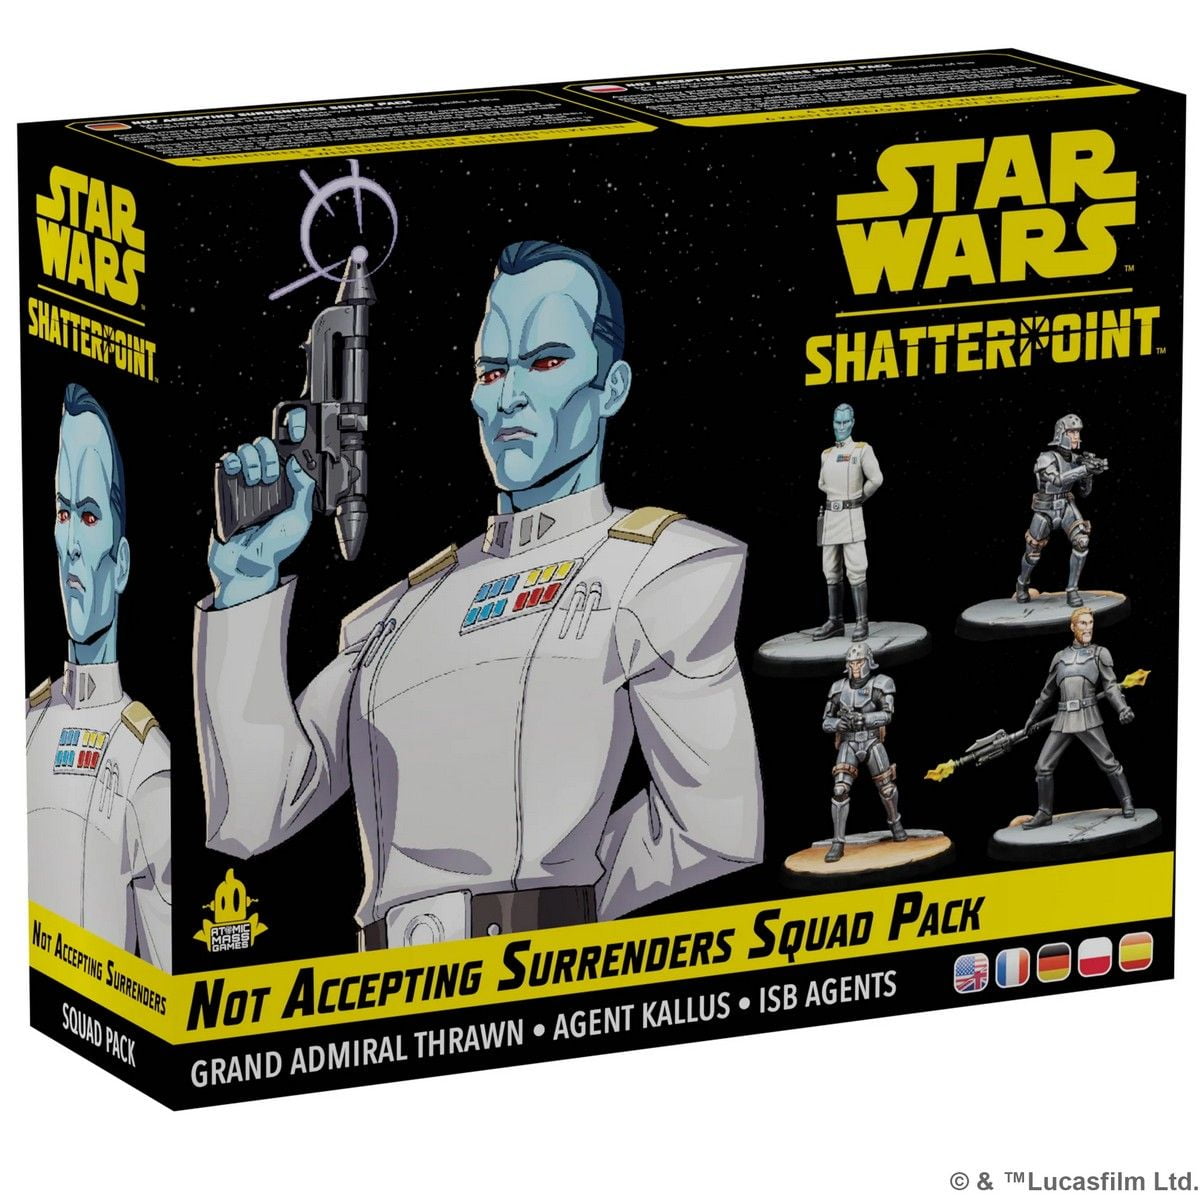 Star Wars: Shatterpoint: Not Accepting Surrenders Squad Pack